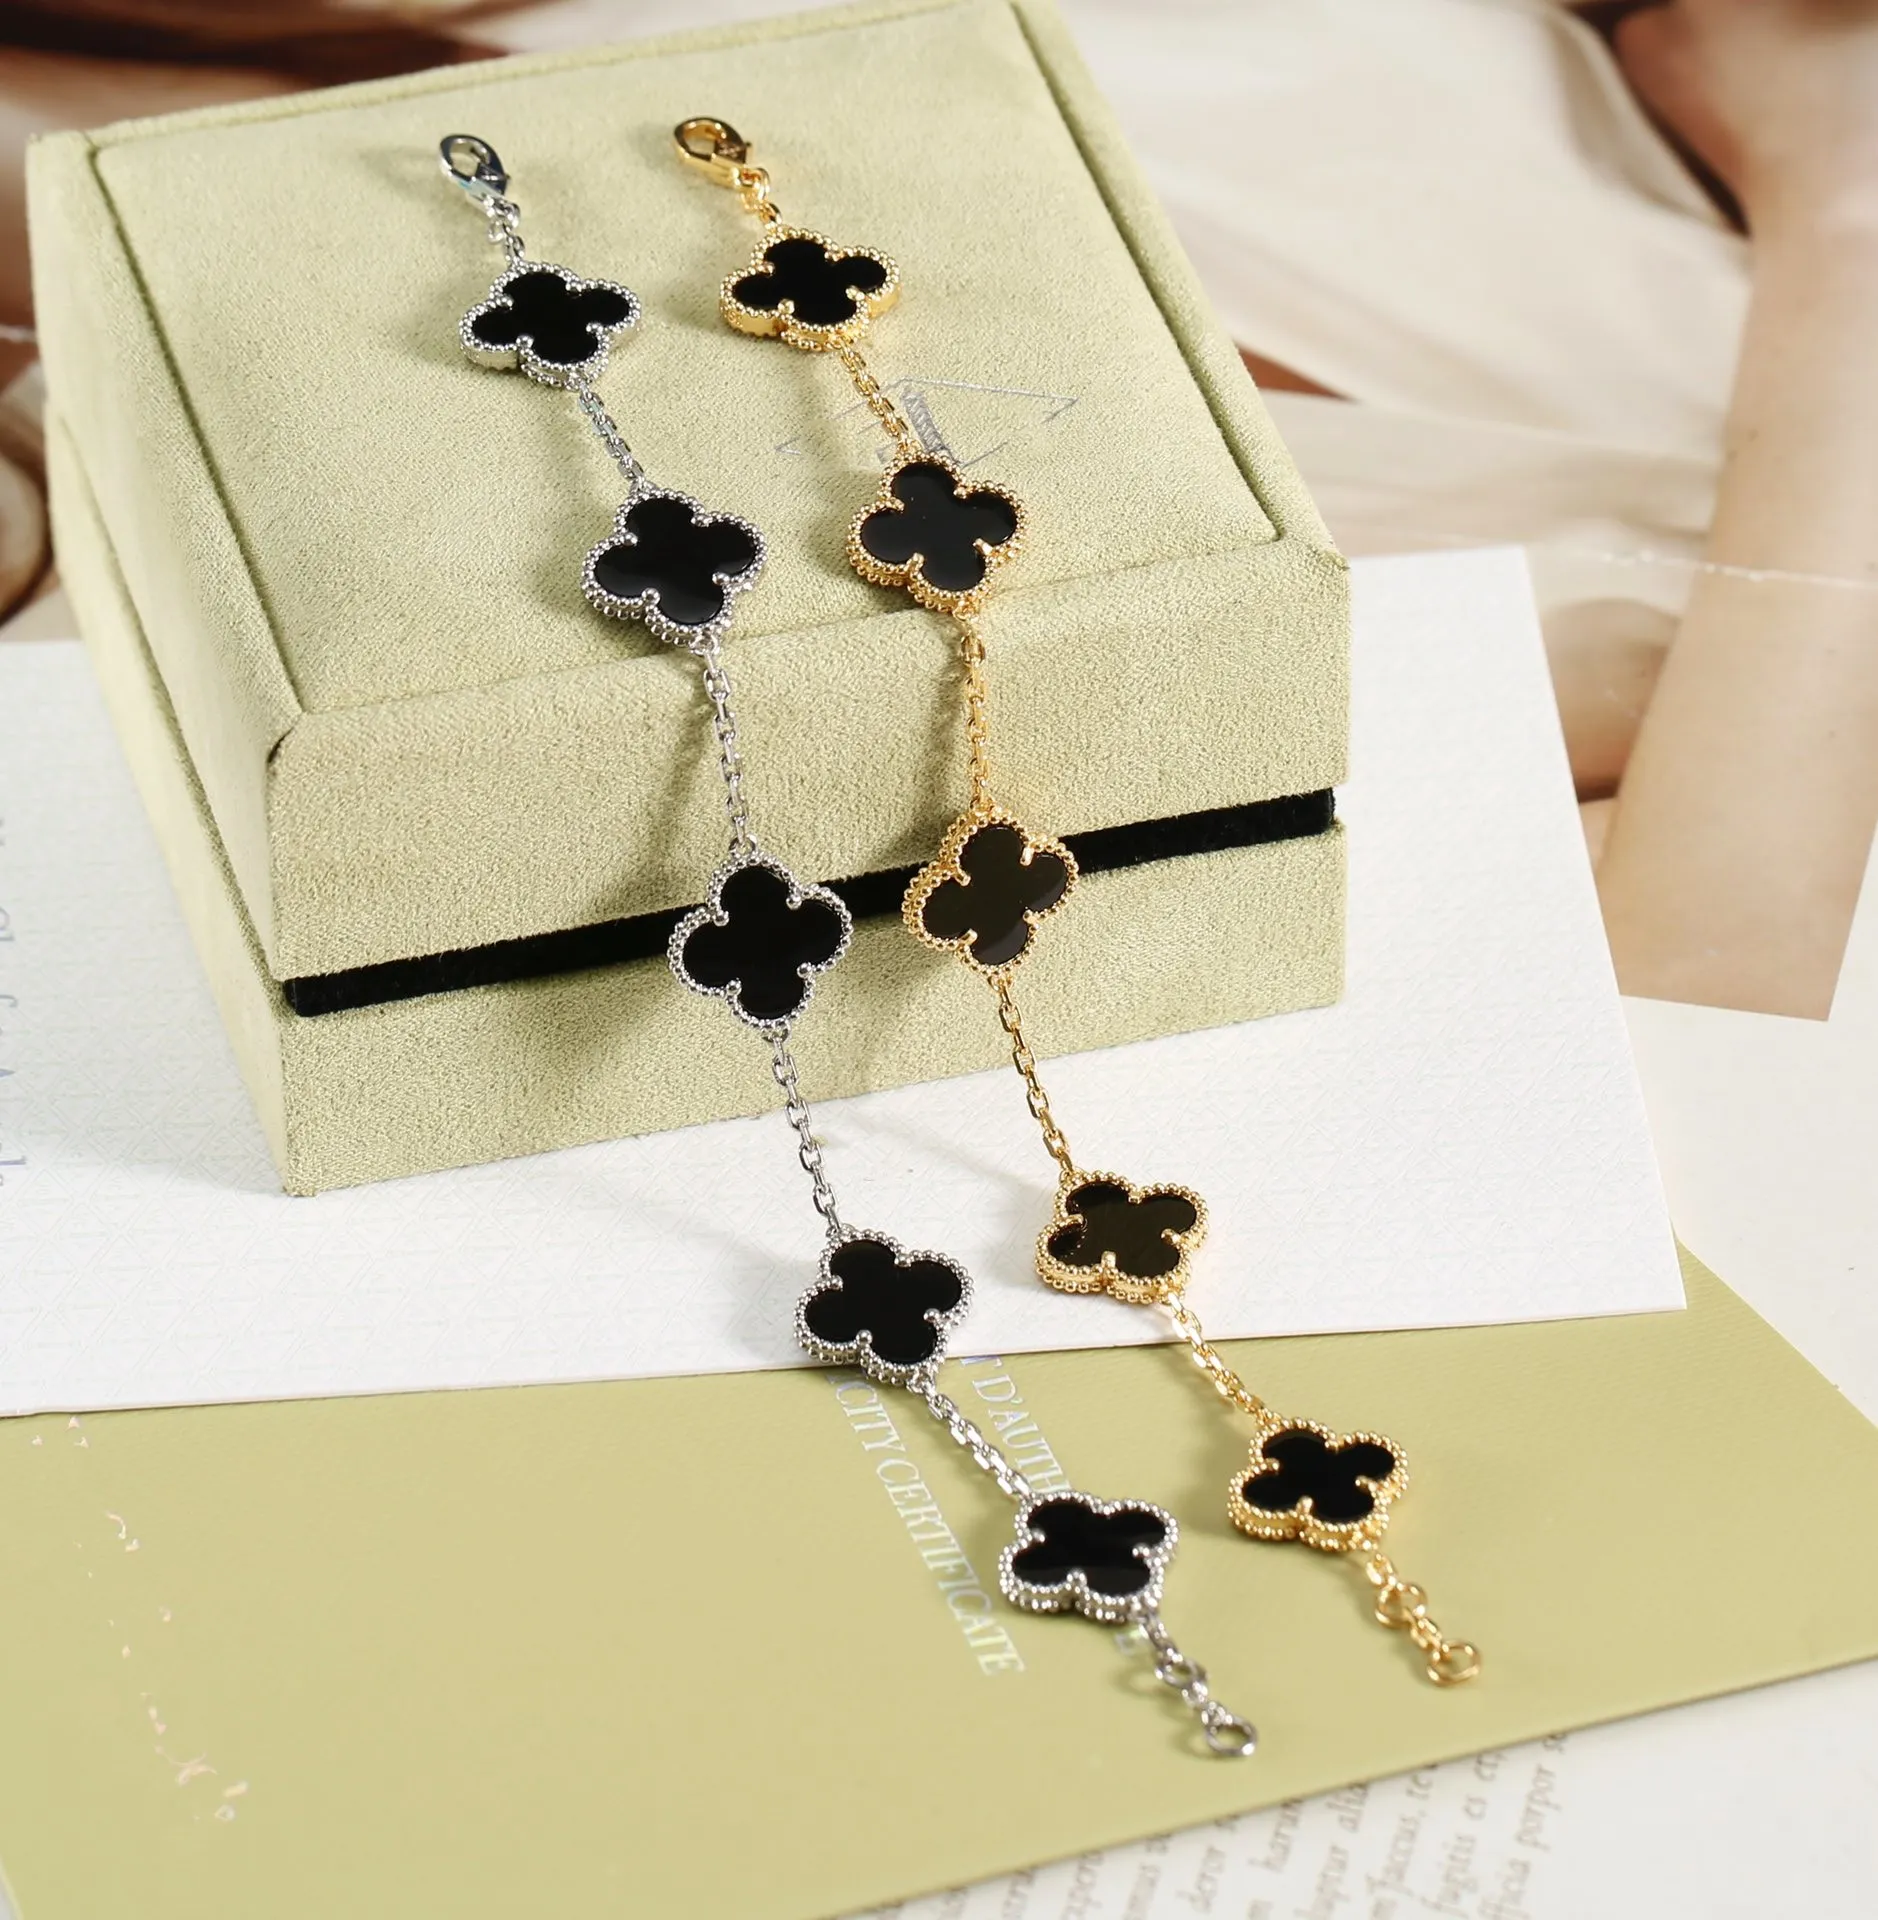 Vintage Charm Bracelets Copper With 18k Gold Plated White Ceramic Brand Designer Four Leaf Clover Flower Bracelet For Women With Box Party Gift Jewelry